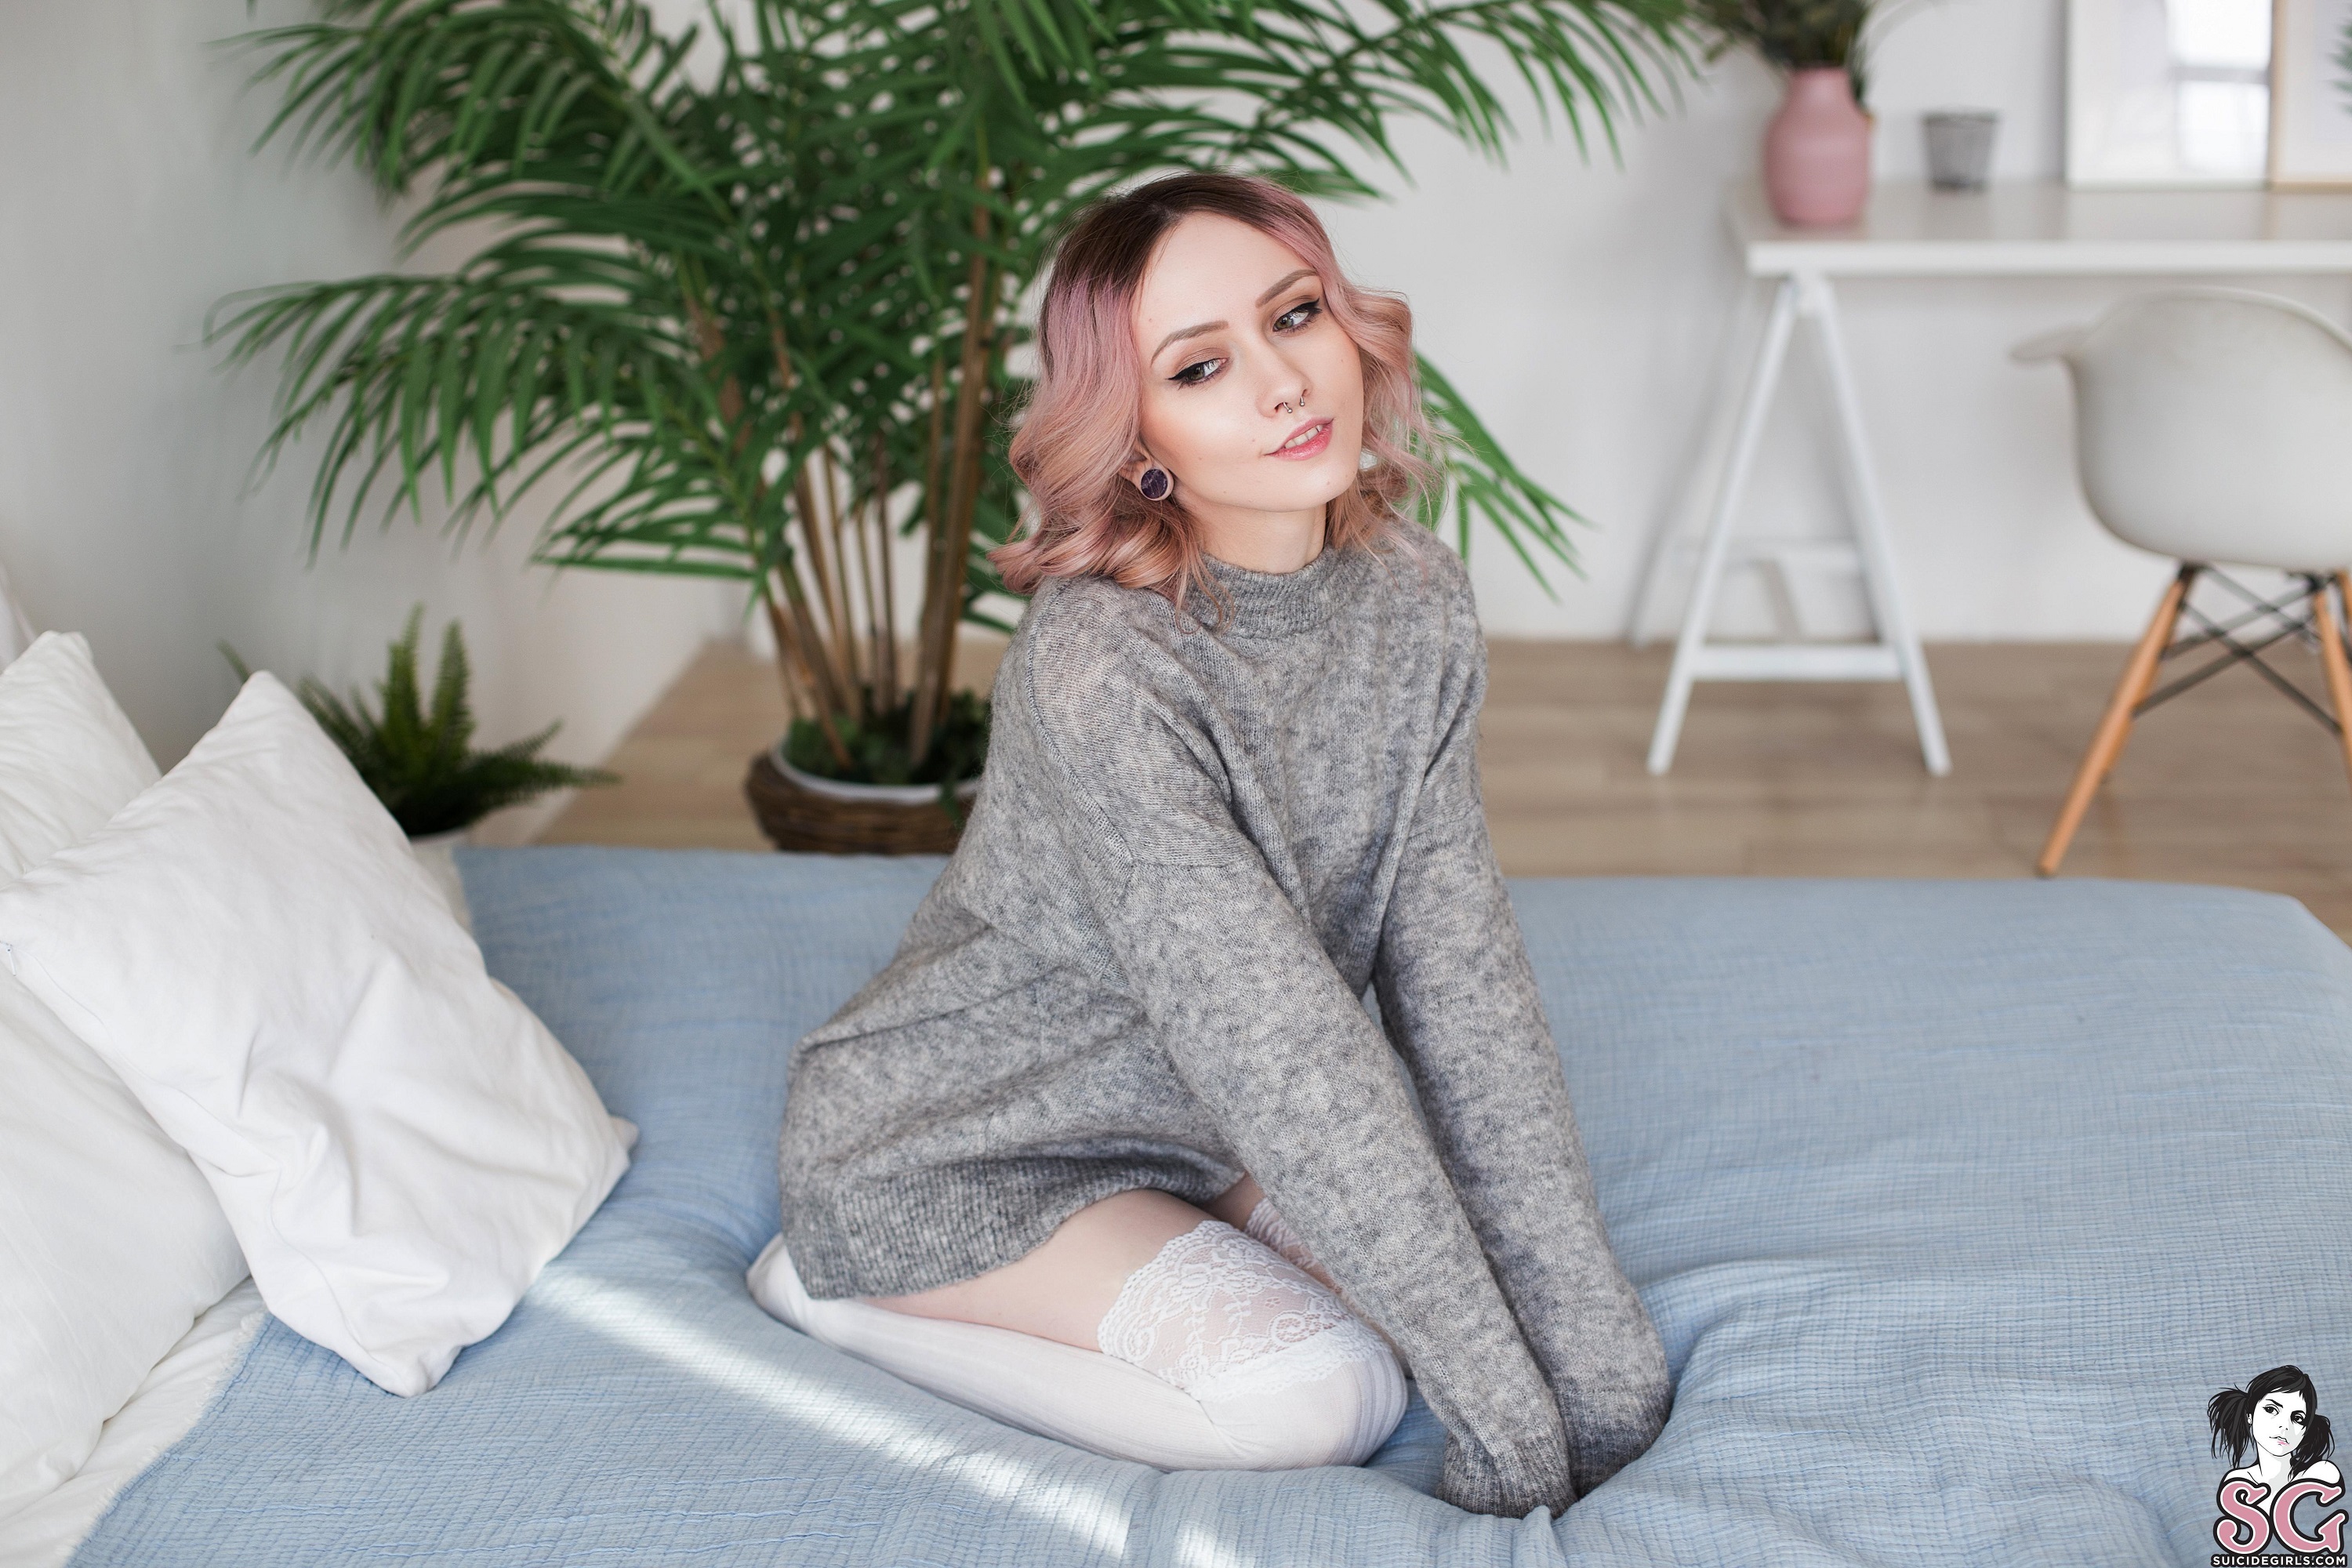 Women Model Dyed Hair Looking Away Pierced Septum Smiling Sweater In Bed Pillow Depth Of Field Indoo 3000x2000